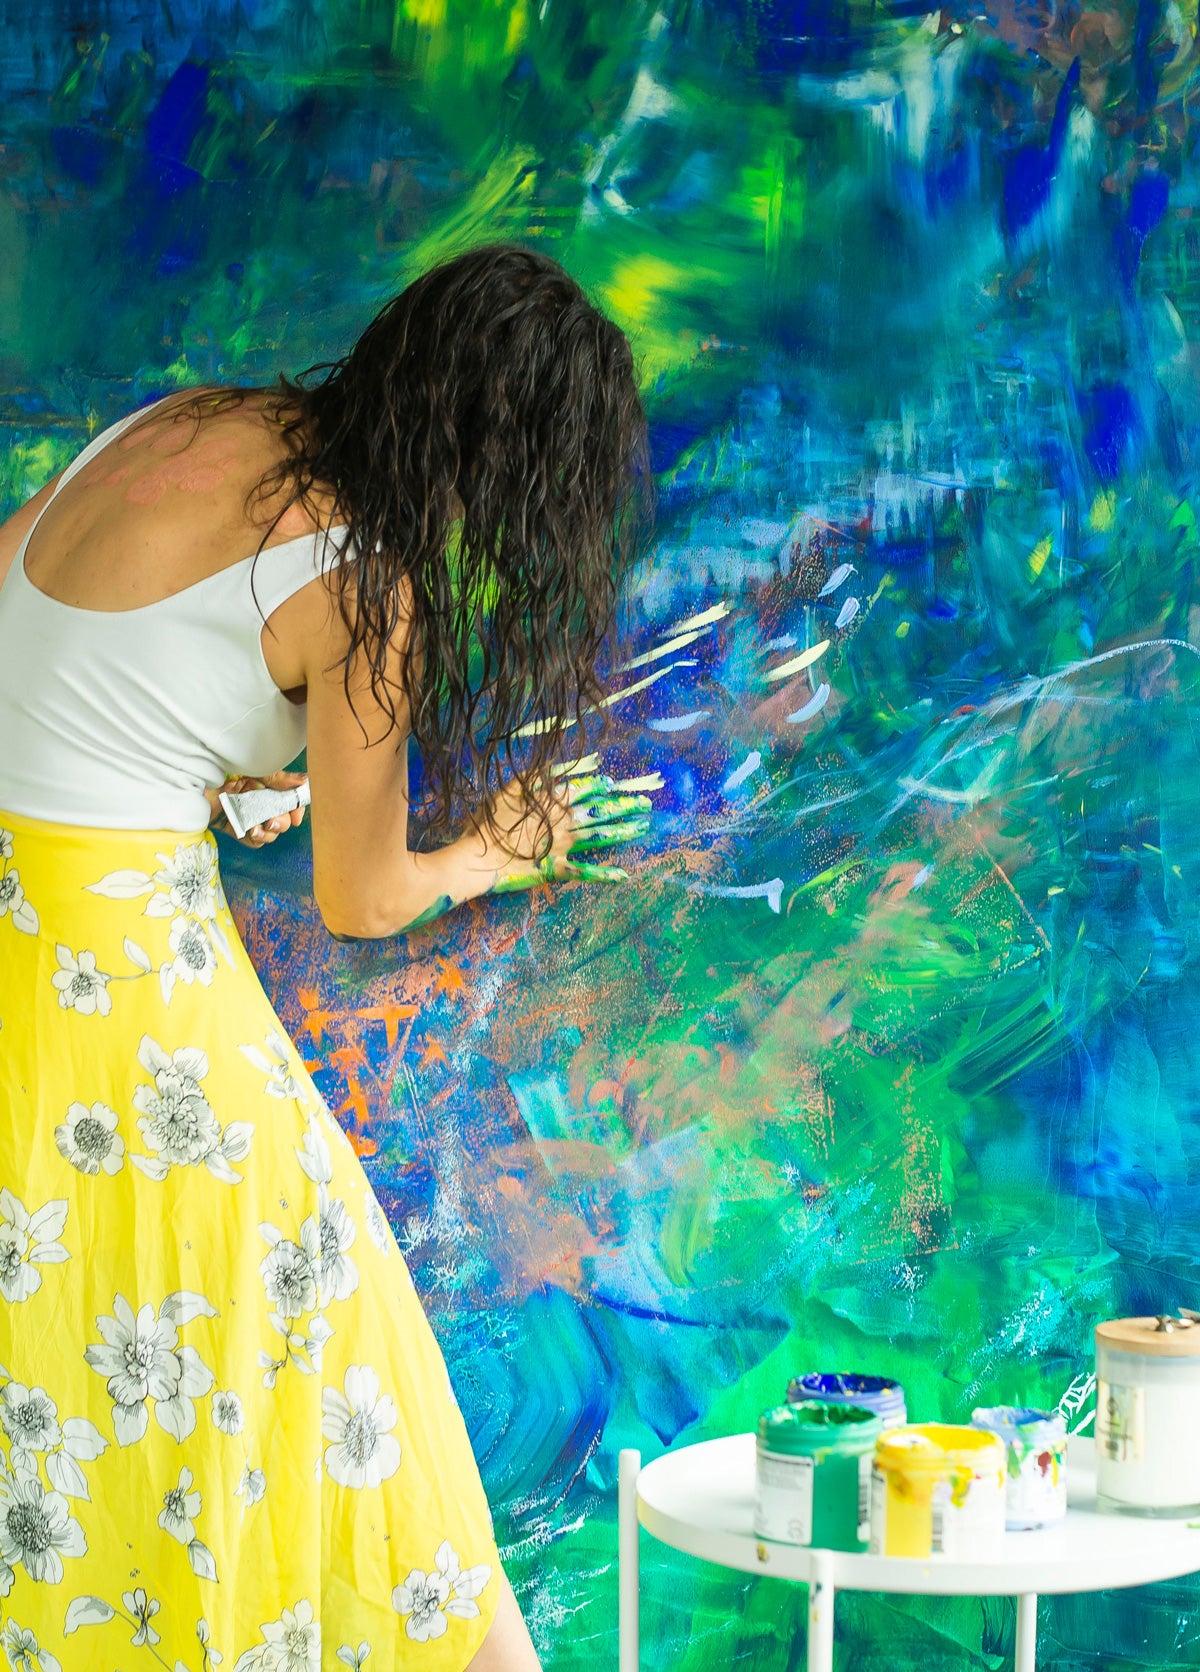 A woman in a yellow skirt paints